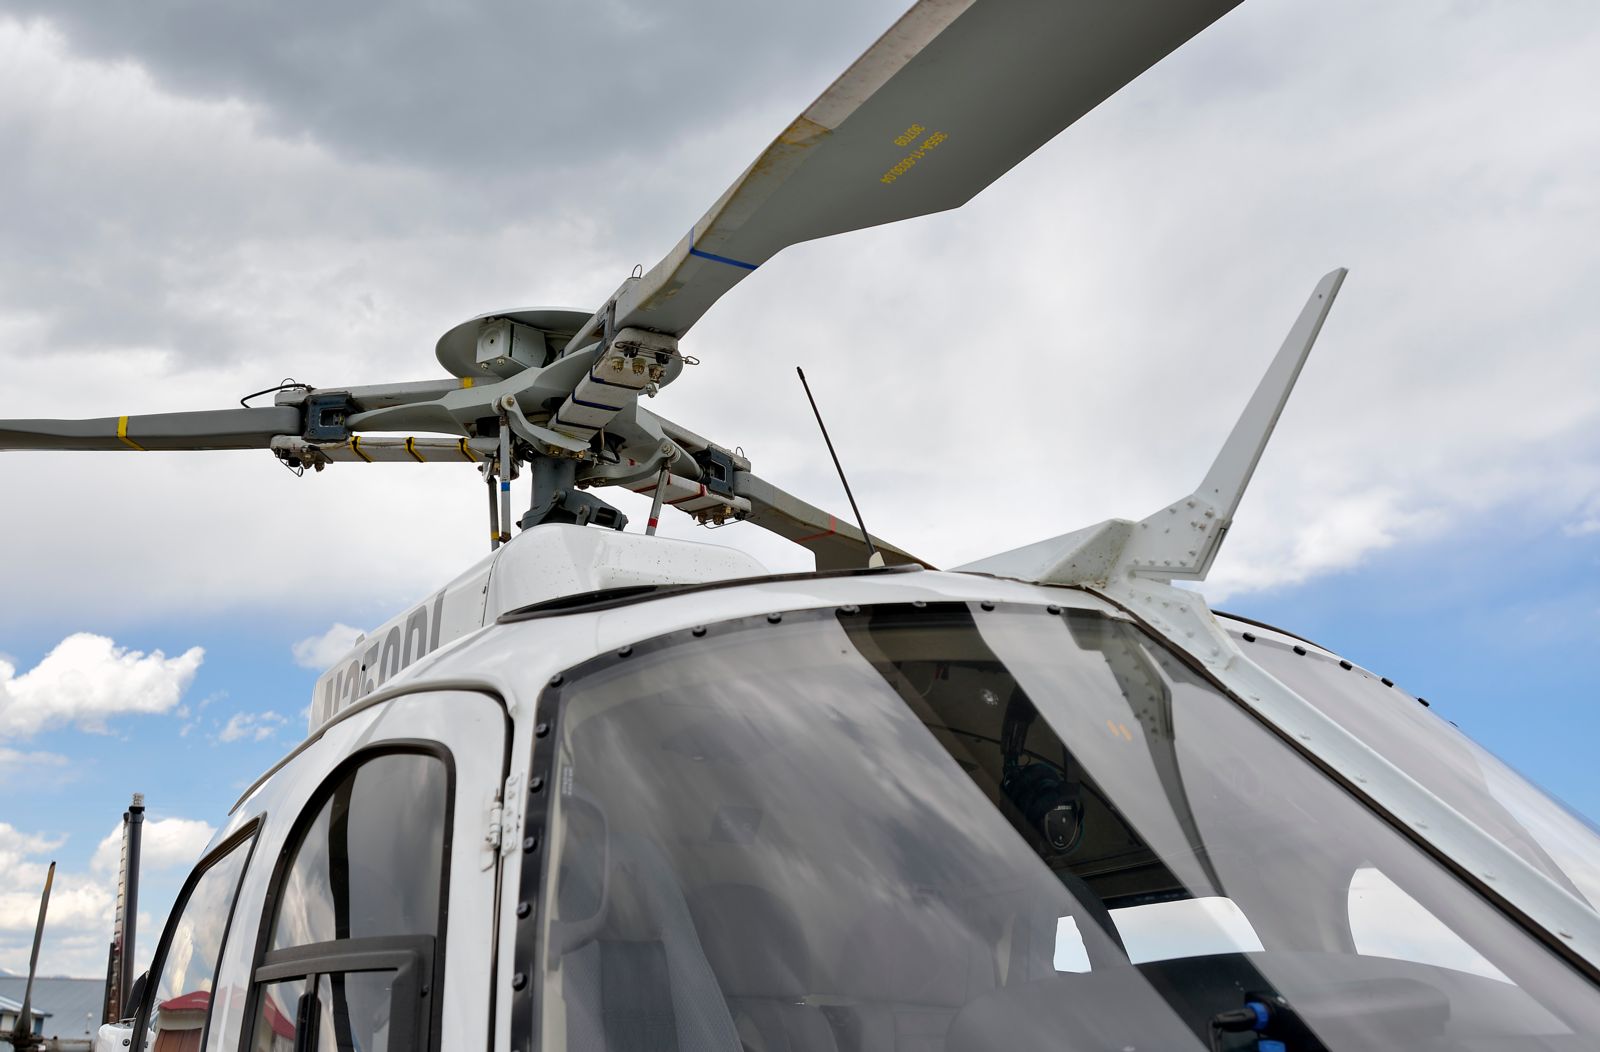 Eurocopter AS350 B3 gallery image /userfiles/images/Eurocopter_AS350B3_sn4508/ext3_300.jpg